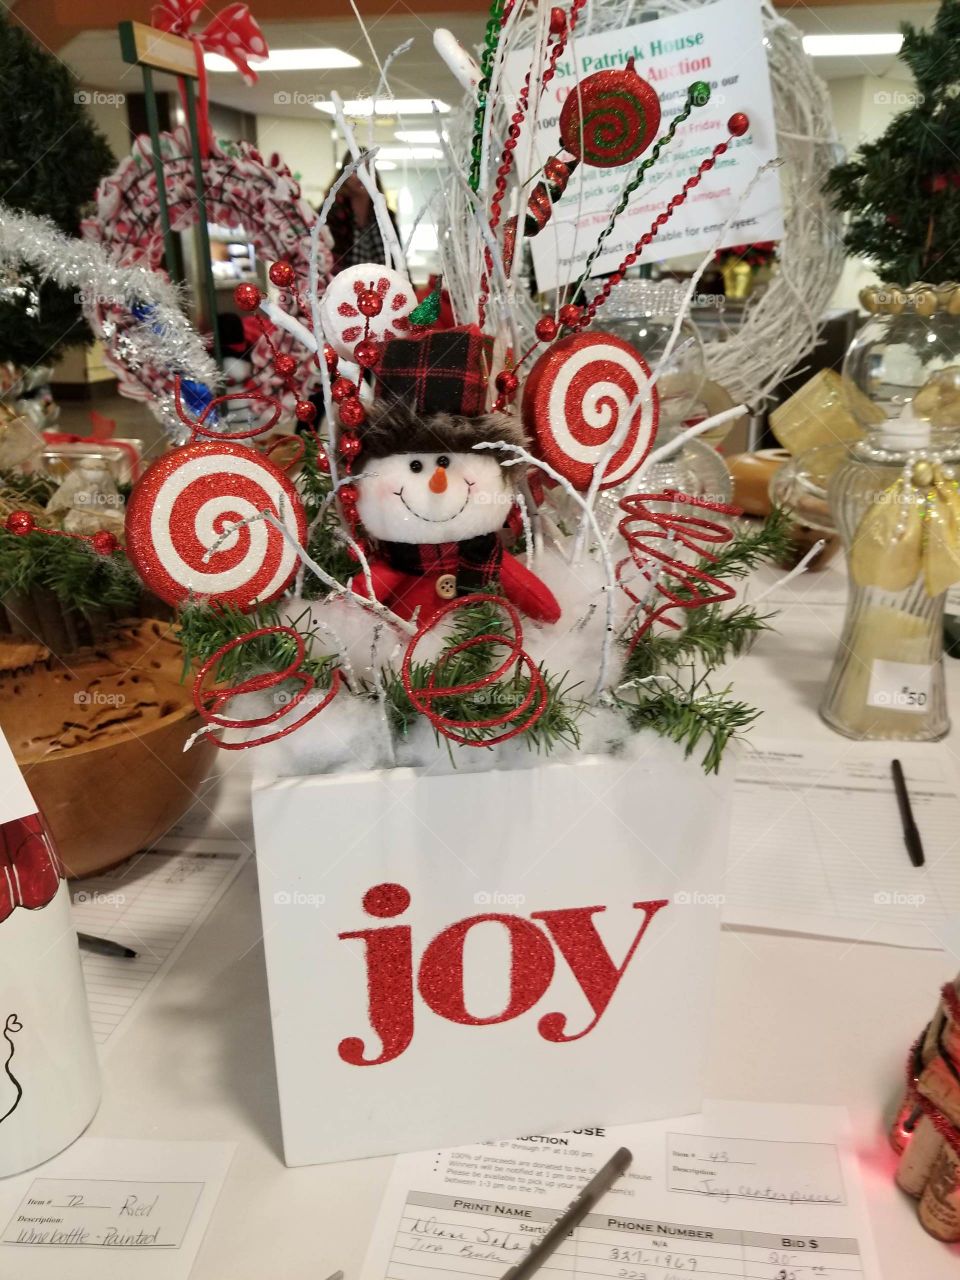 joy,  snowman holding two lolly pops, red and white decoration